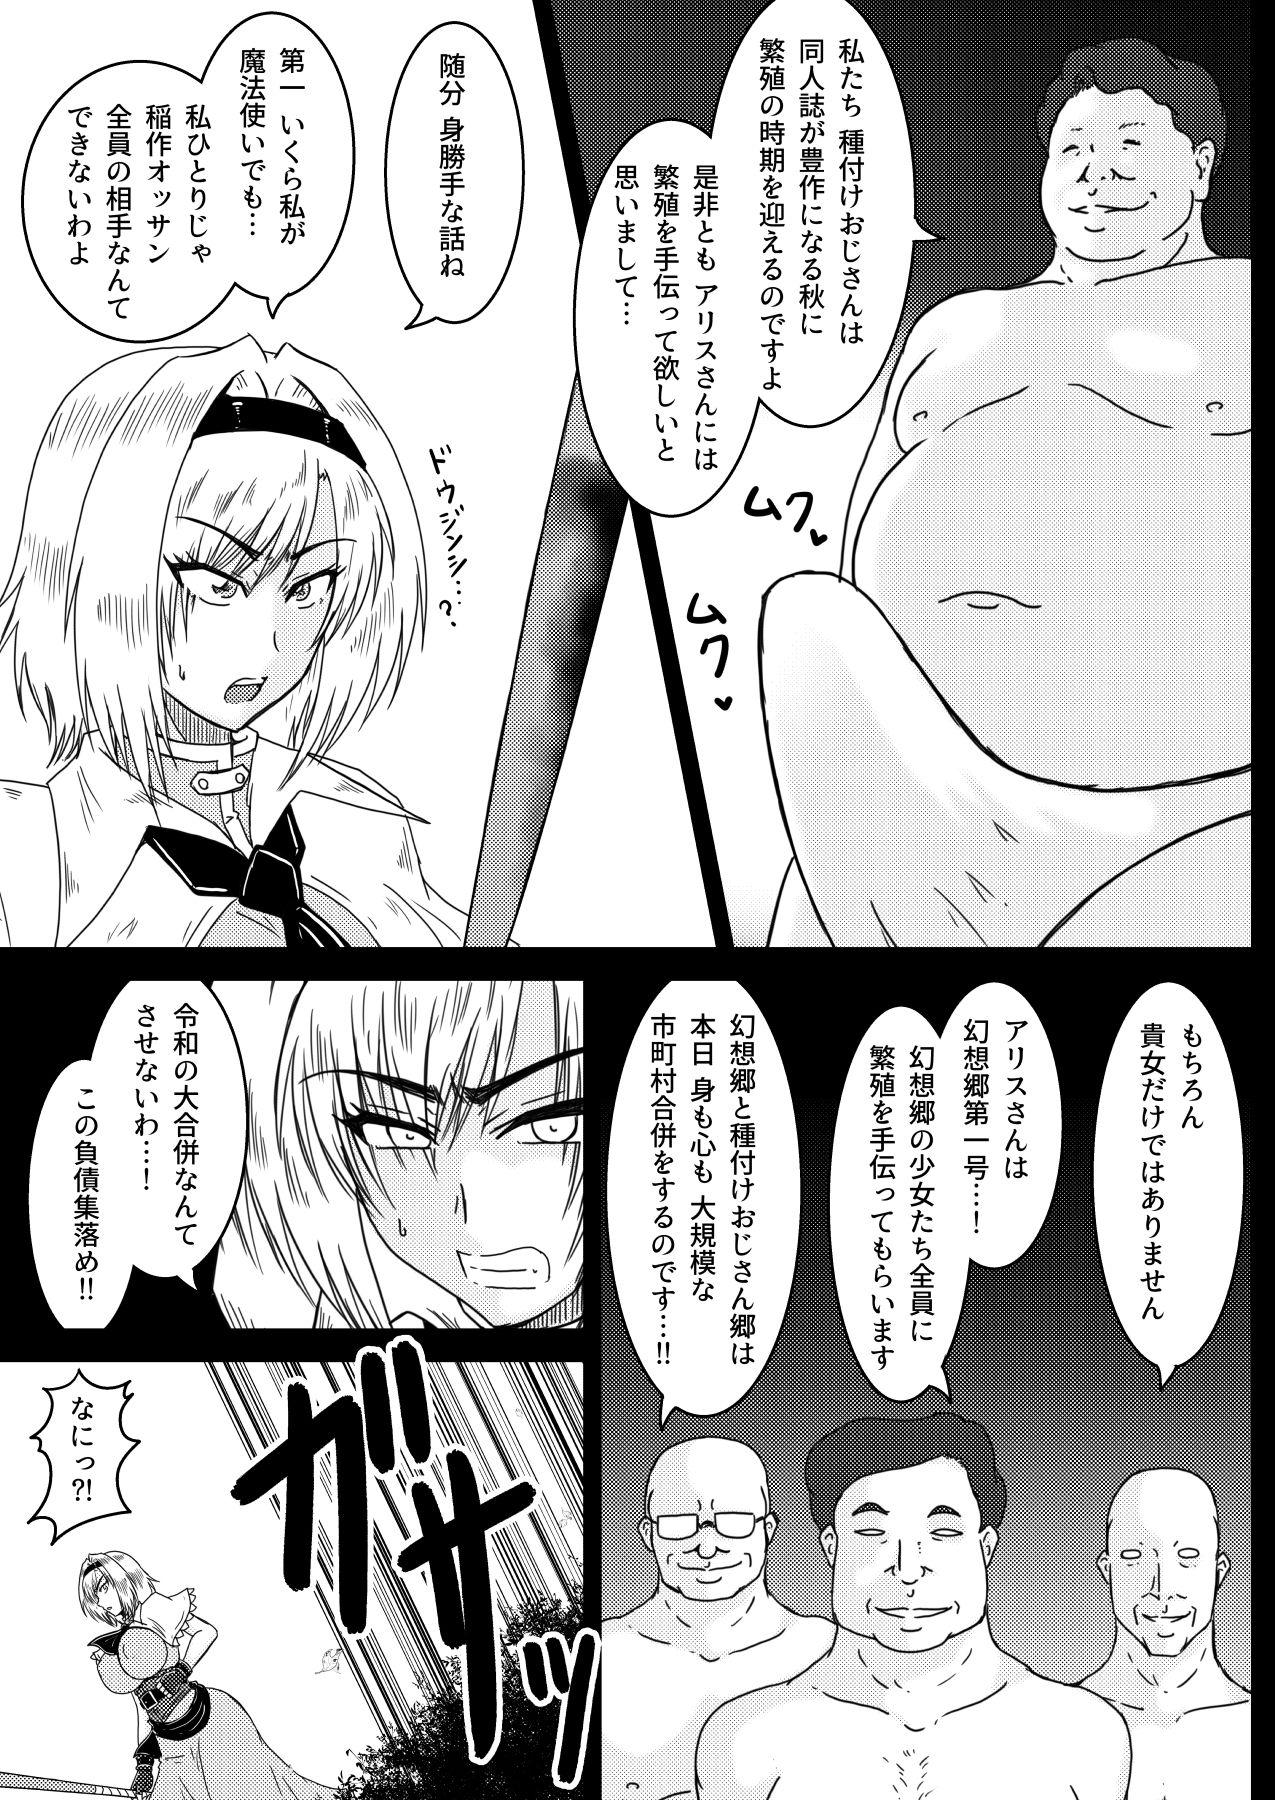 Ex Girlfriend 種付けおじさん百鬼夜行 - Touhou project Milf - Page 6